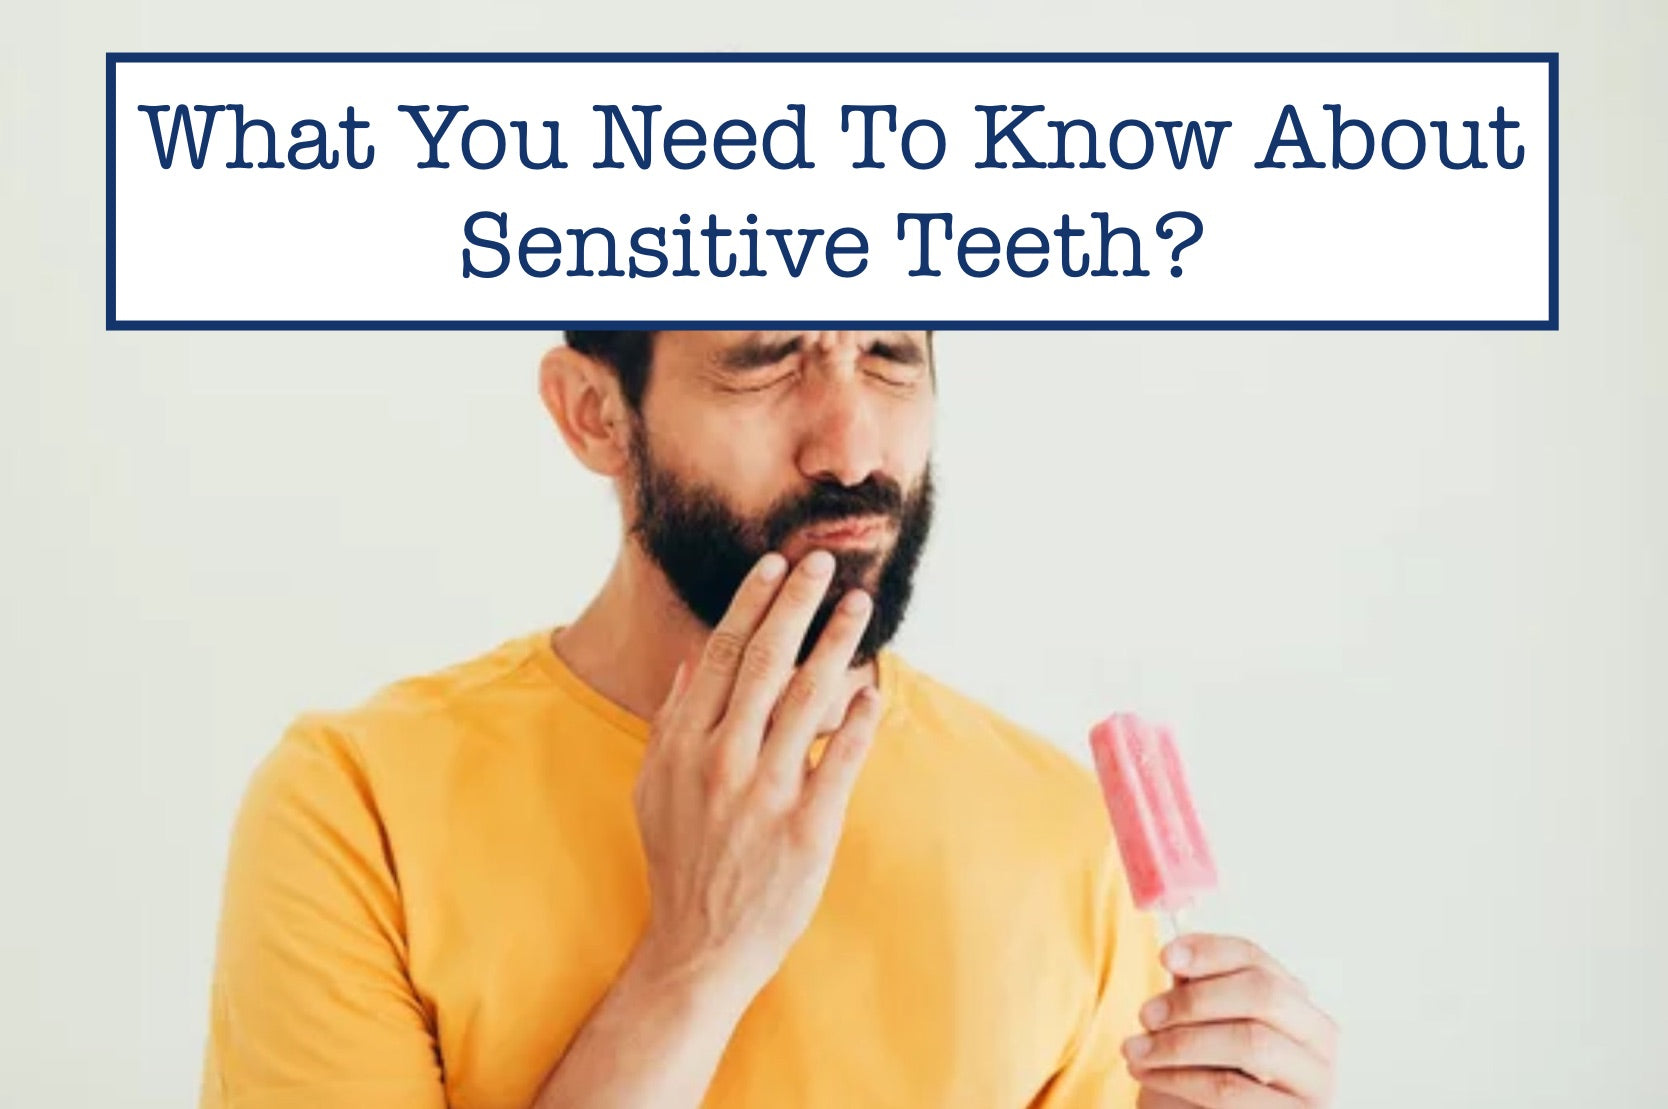 What You Need To Know About Sensitive Teeth